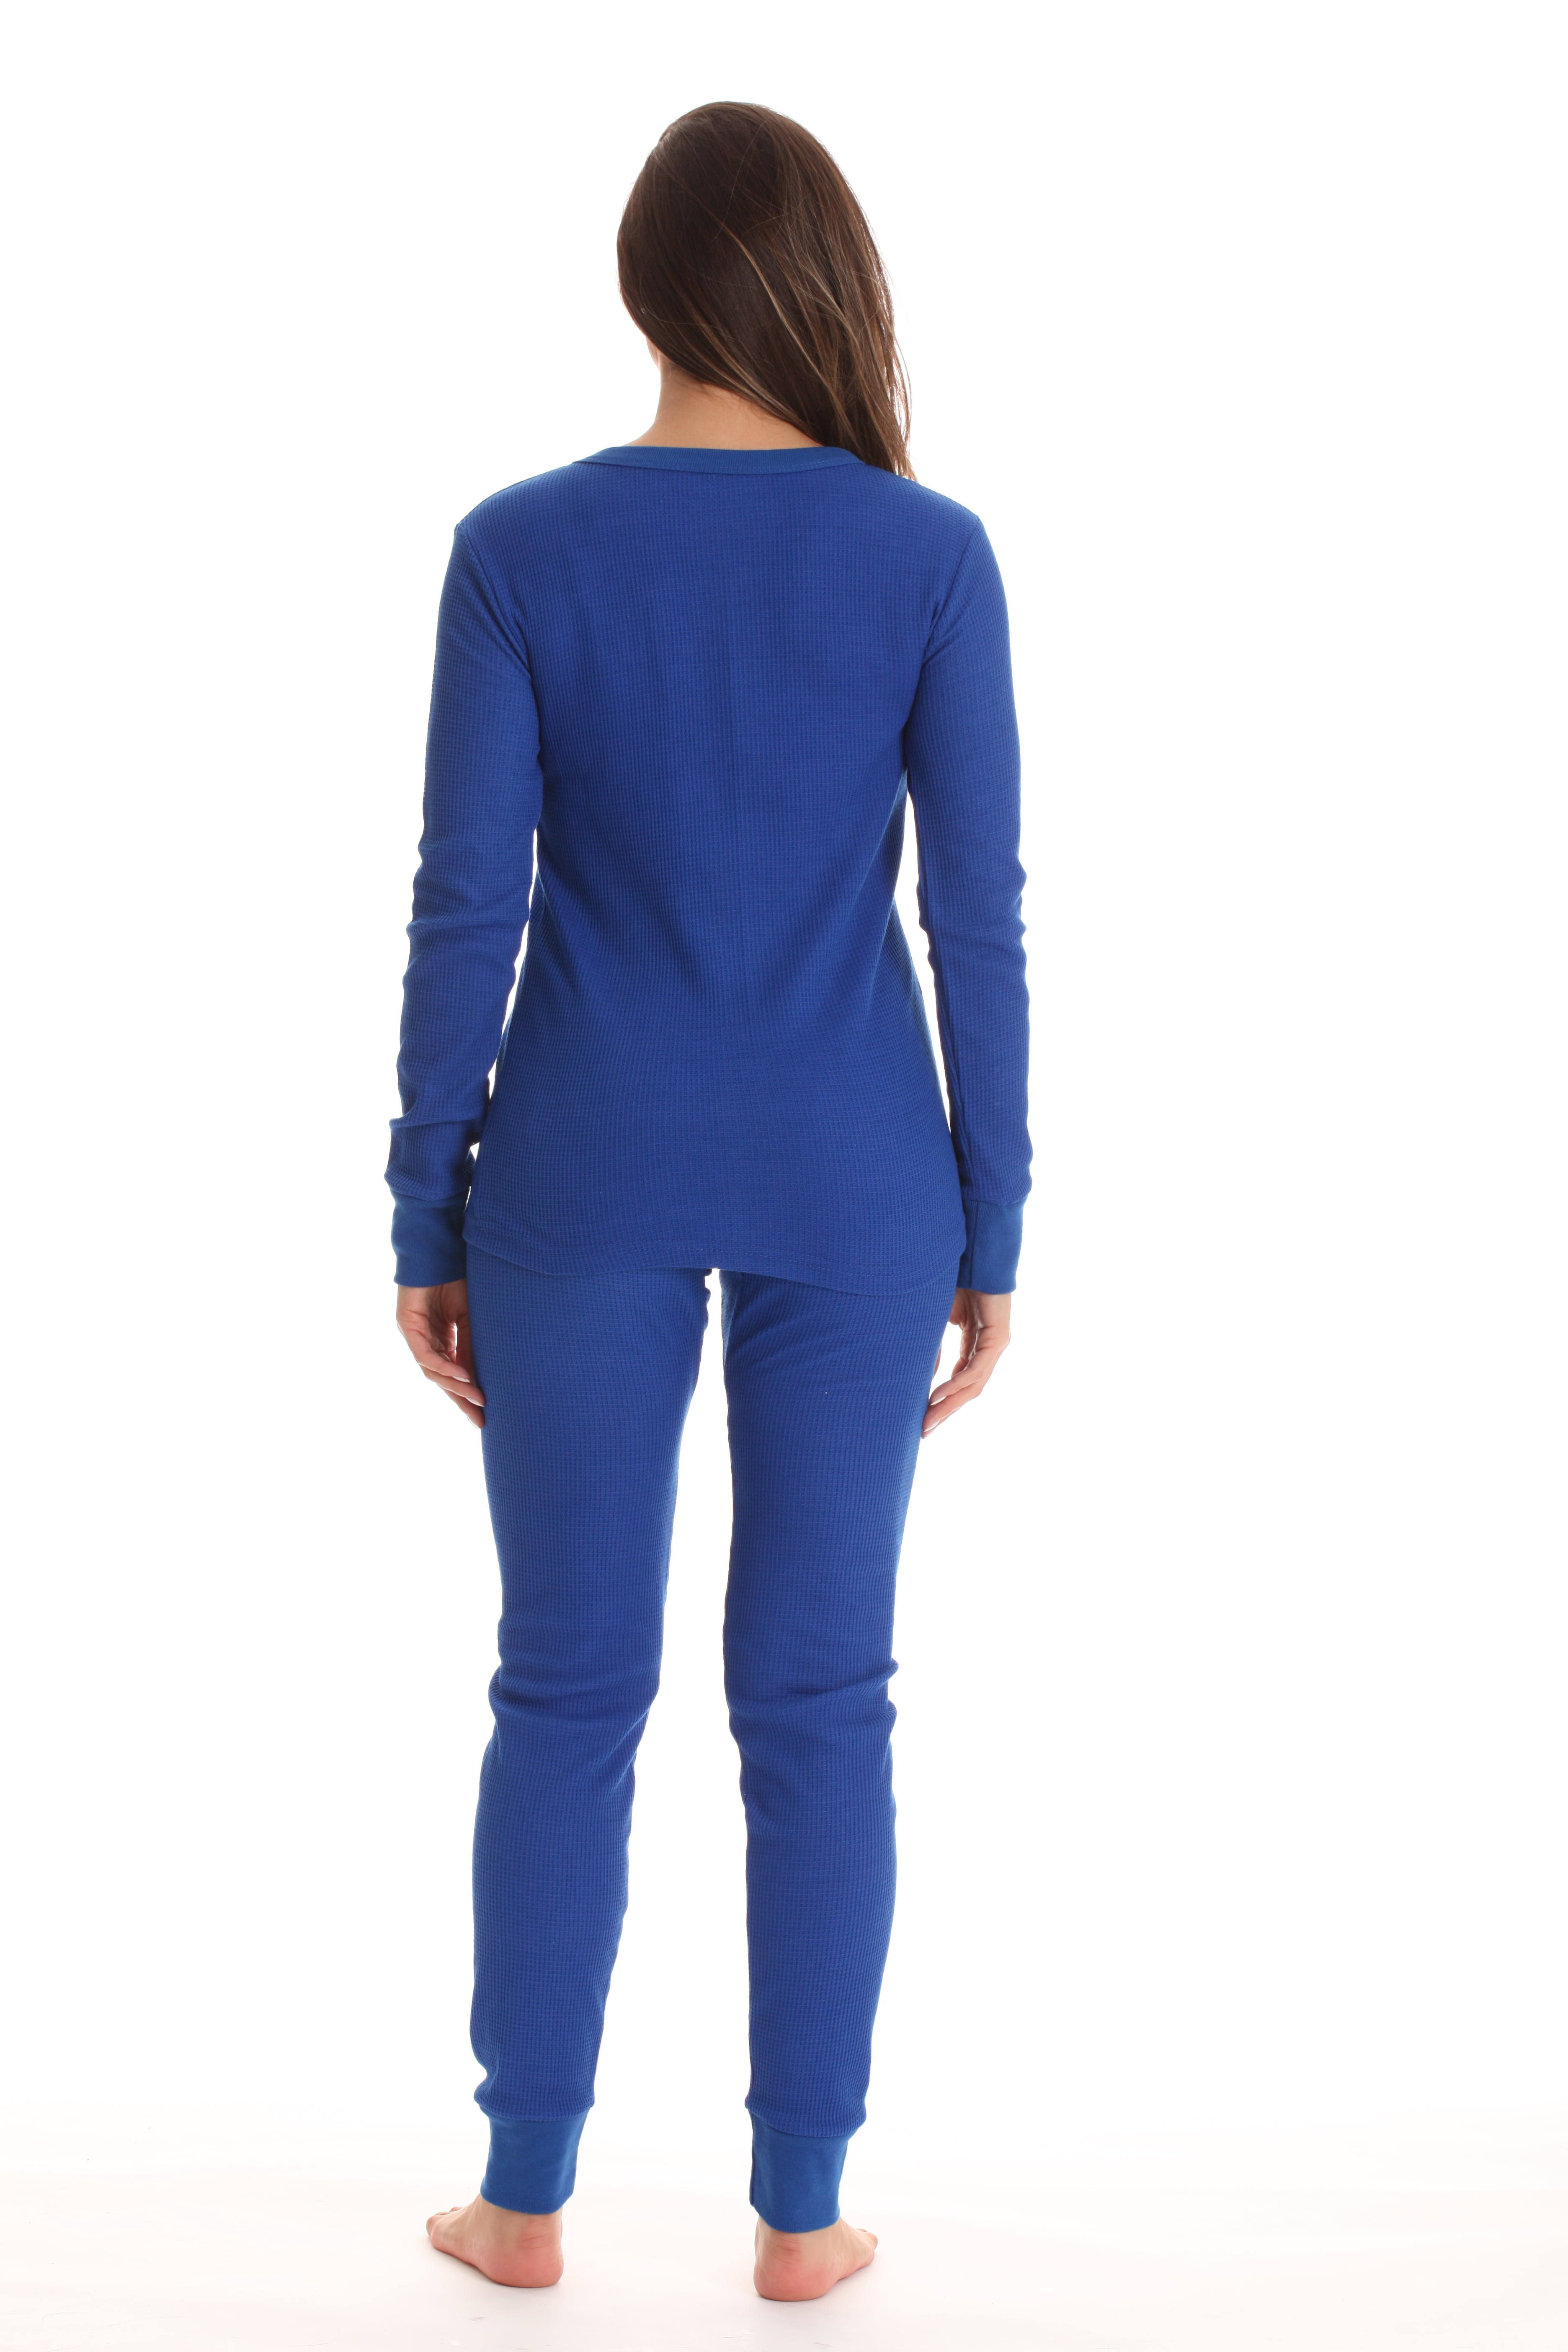 Buy online Blue Cotton Sets Thermals & Inner Wear from winter wear for  Women by Zeffit for ₹749 at 53% off